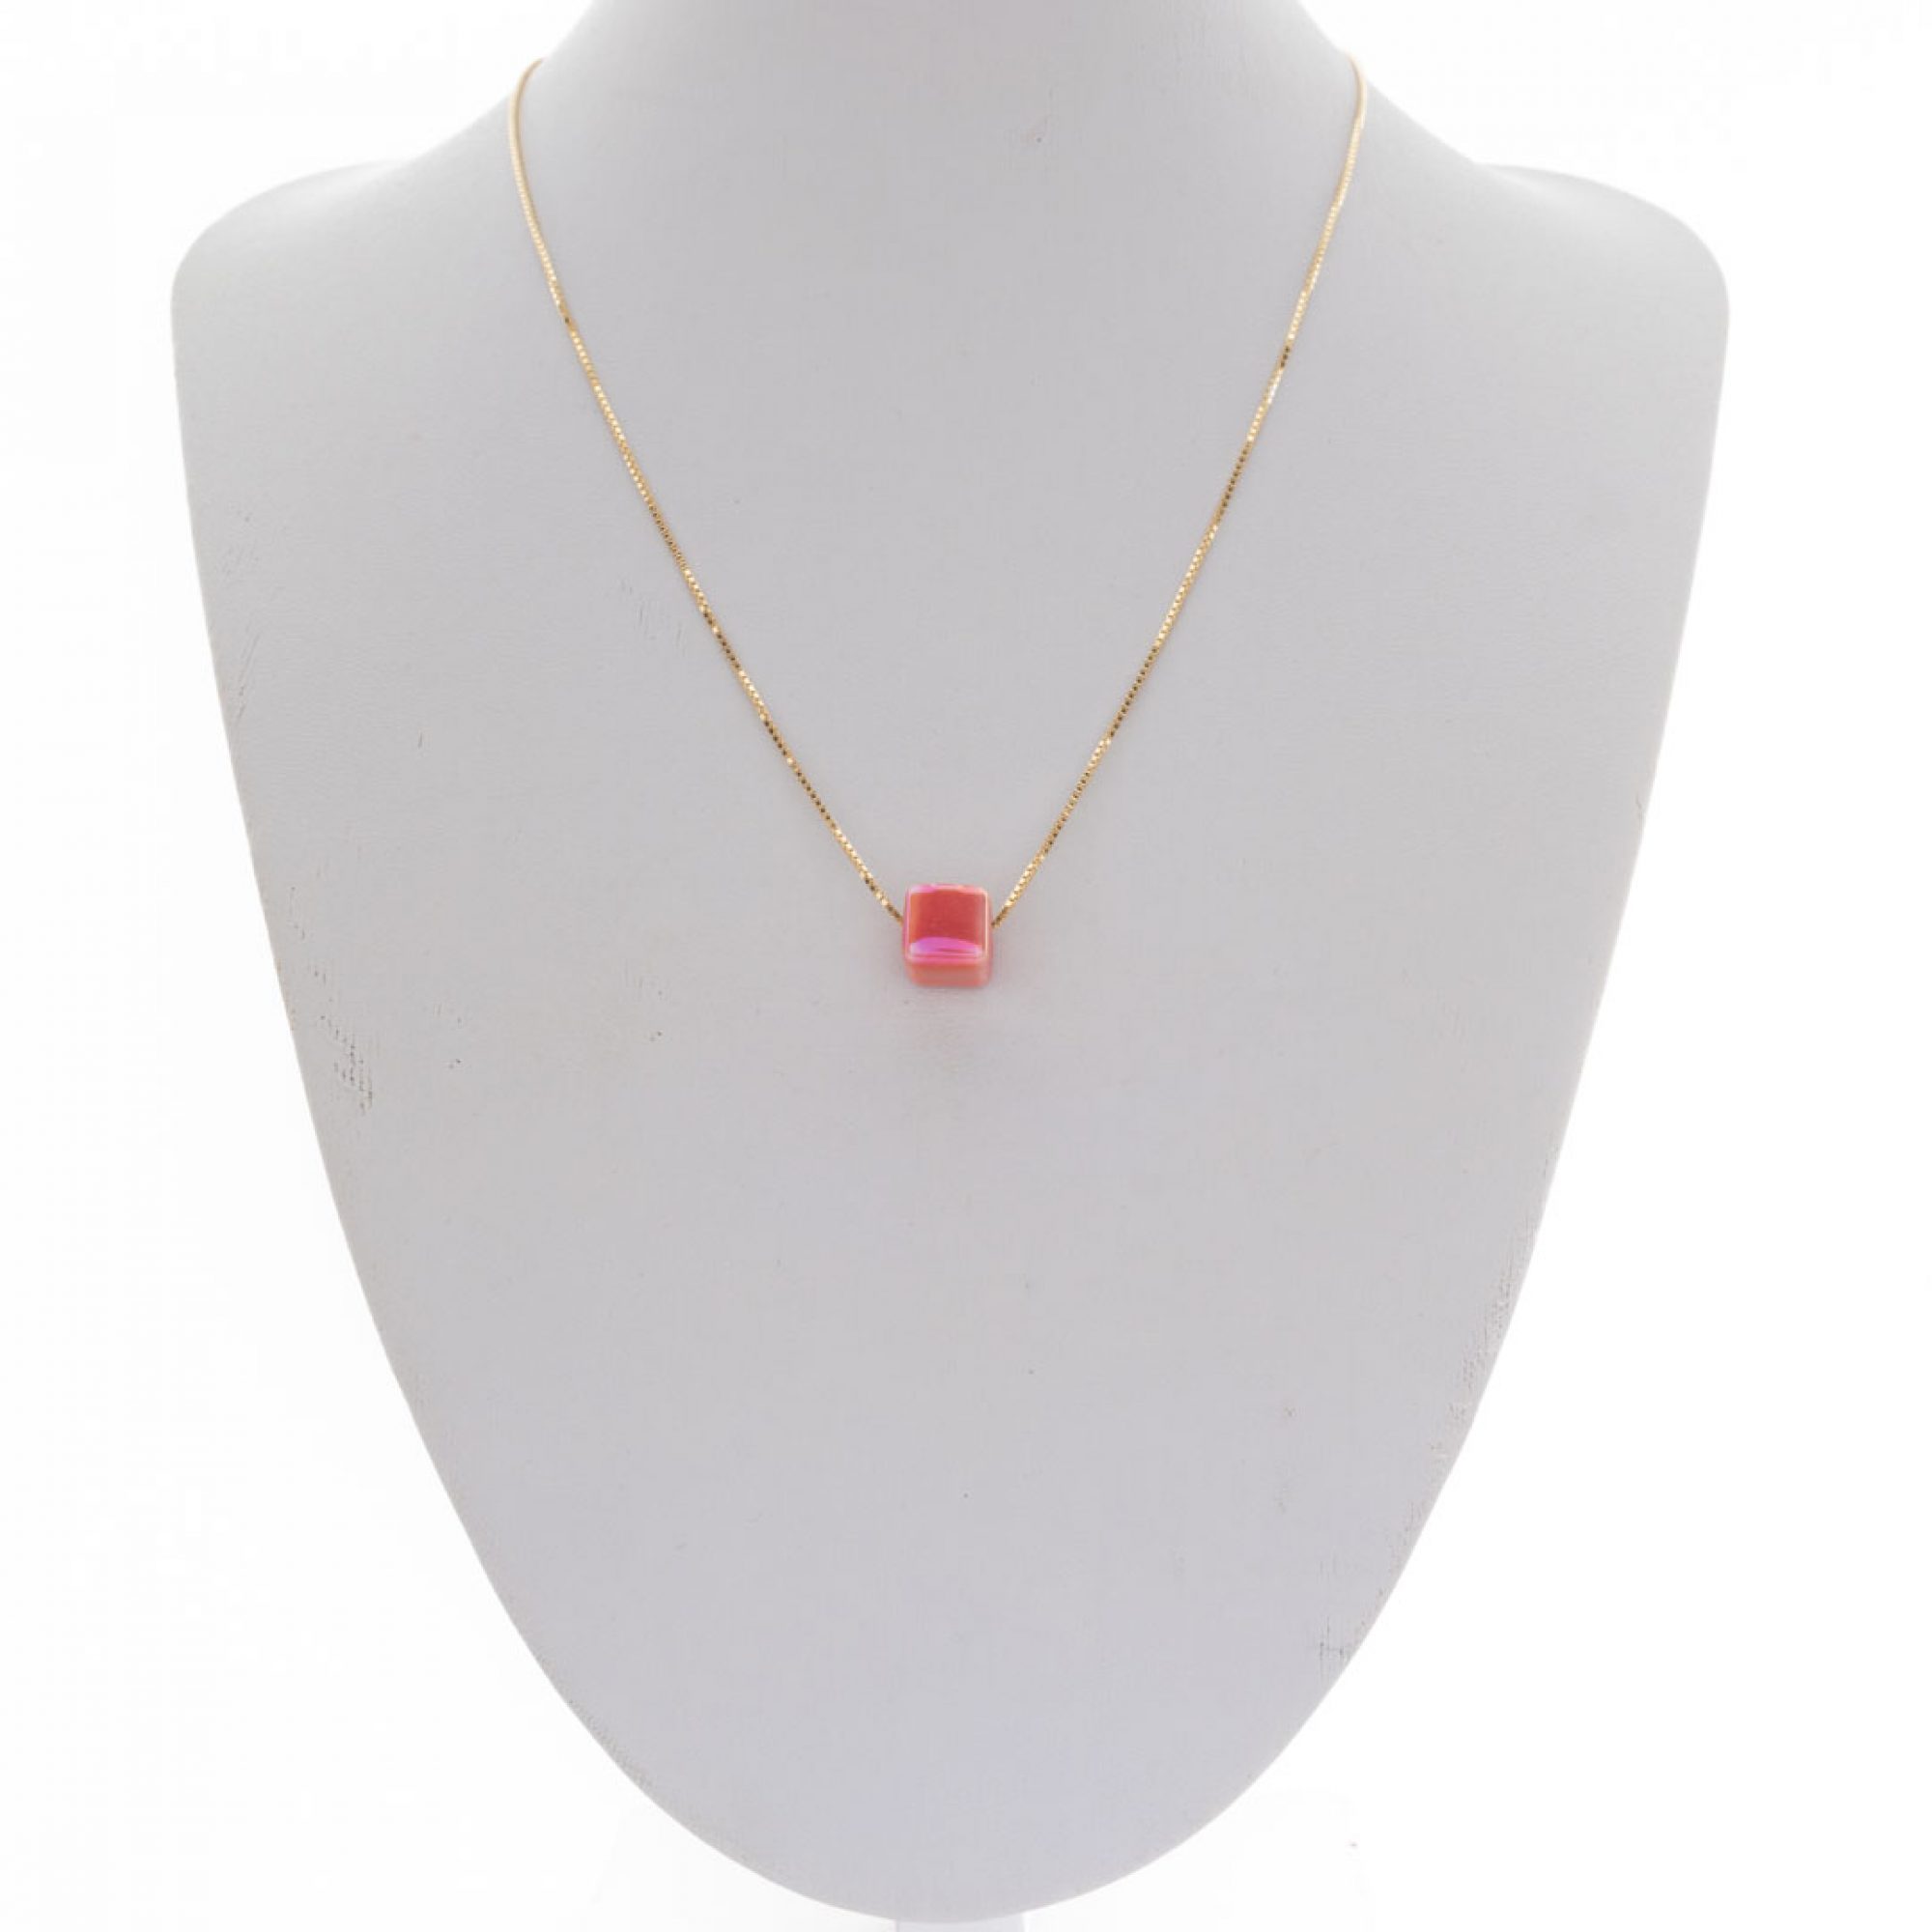 Gold plated peach bead necklace